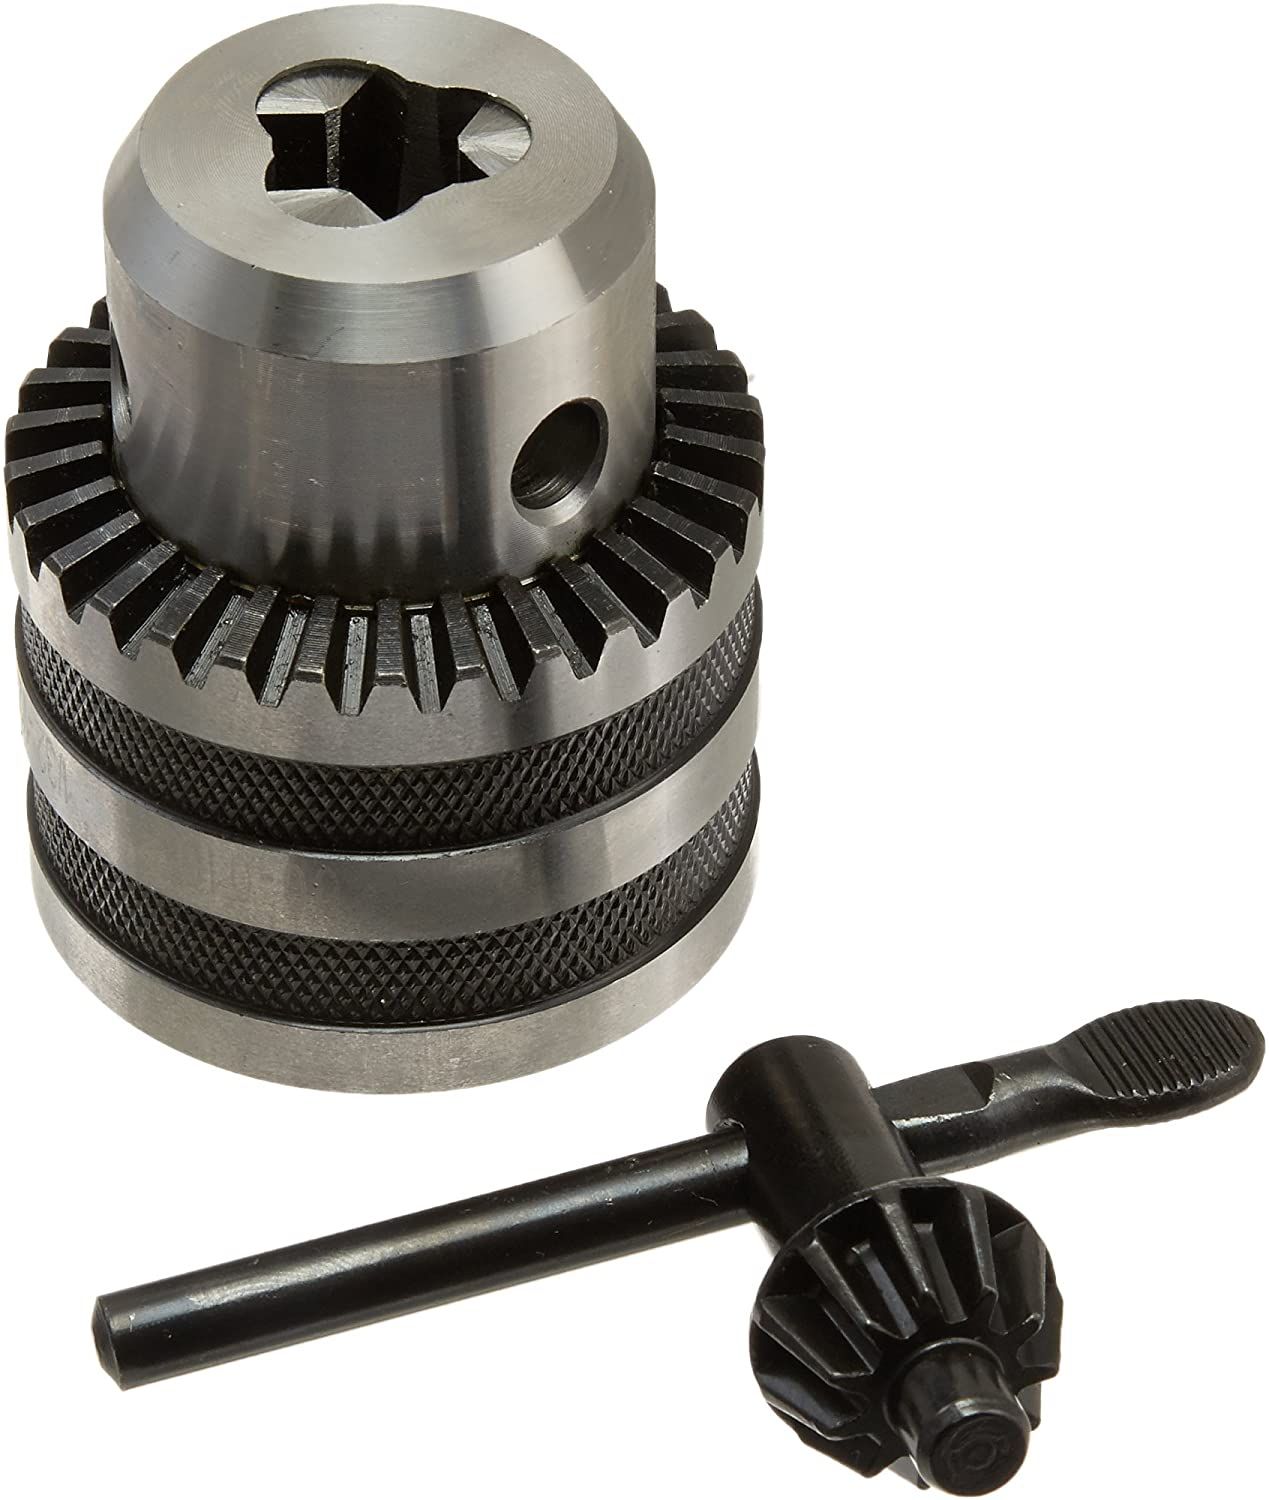 1/32-1/2" JT33 DRILL CHUCK WITH KEY (3700-0102)